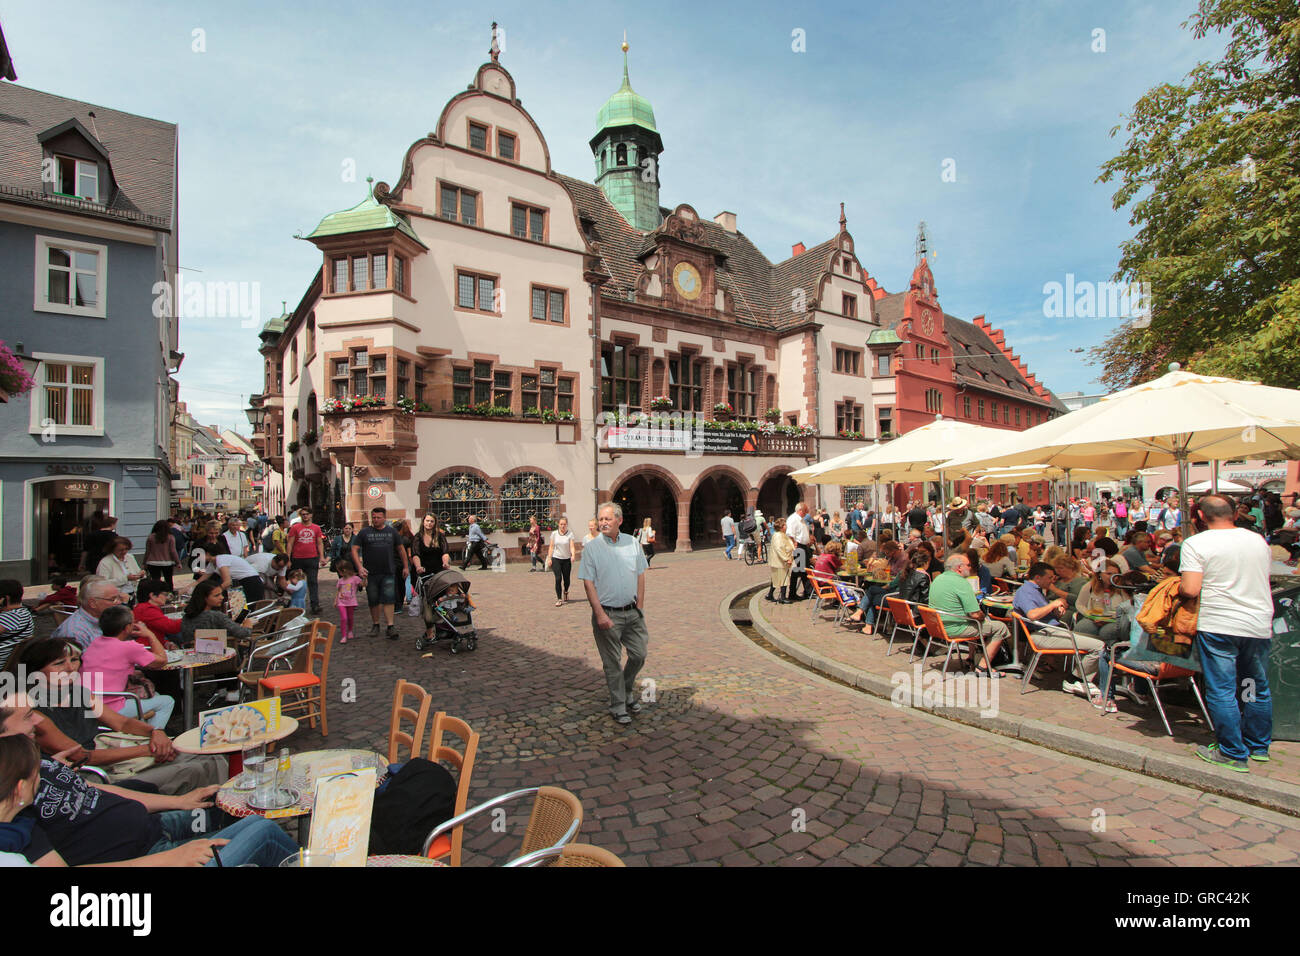 Rathausplatz In Freiburg With Crowded Cafes On A Warm Summer Day Stock Photo